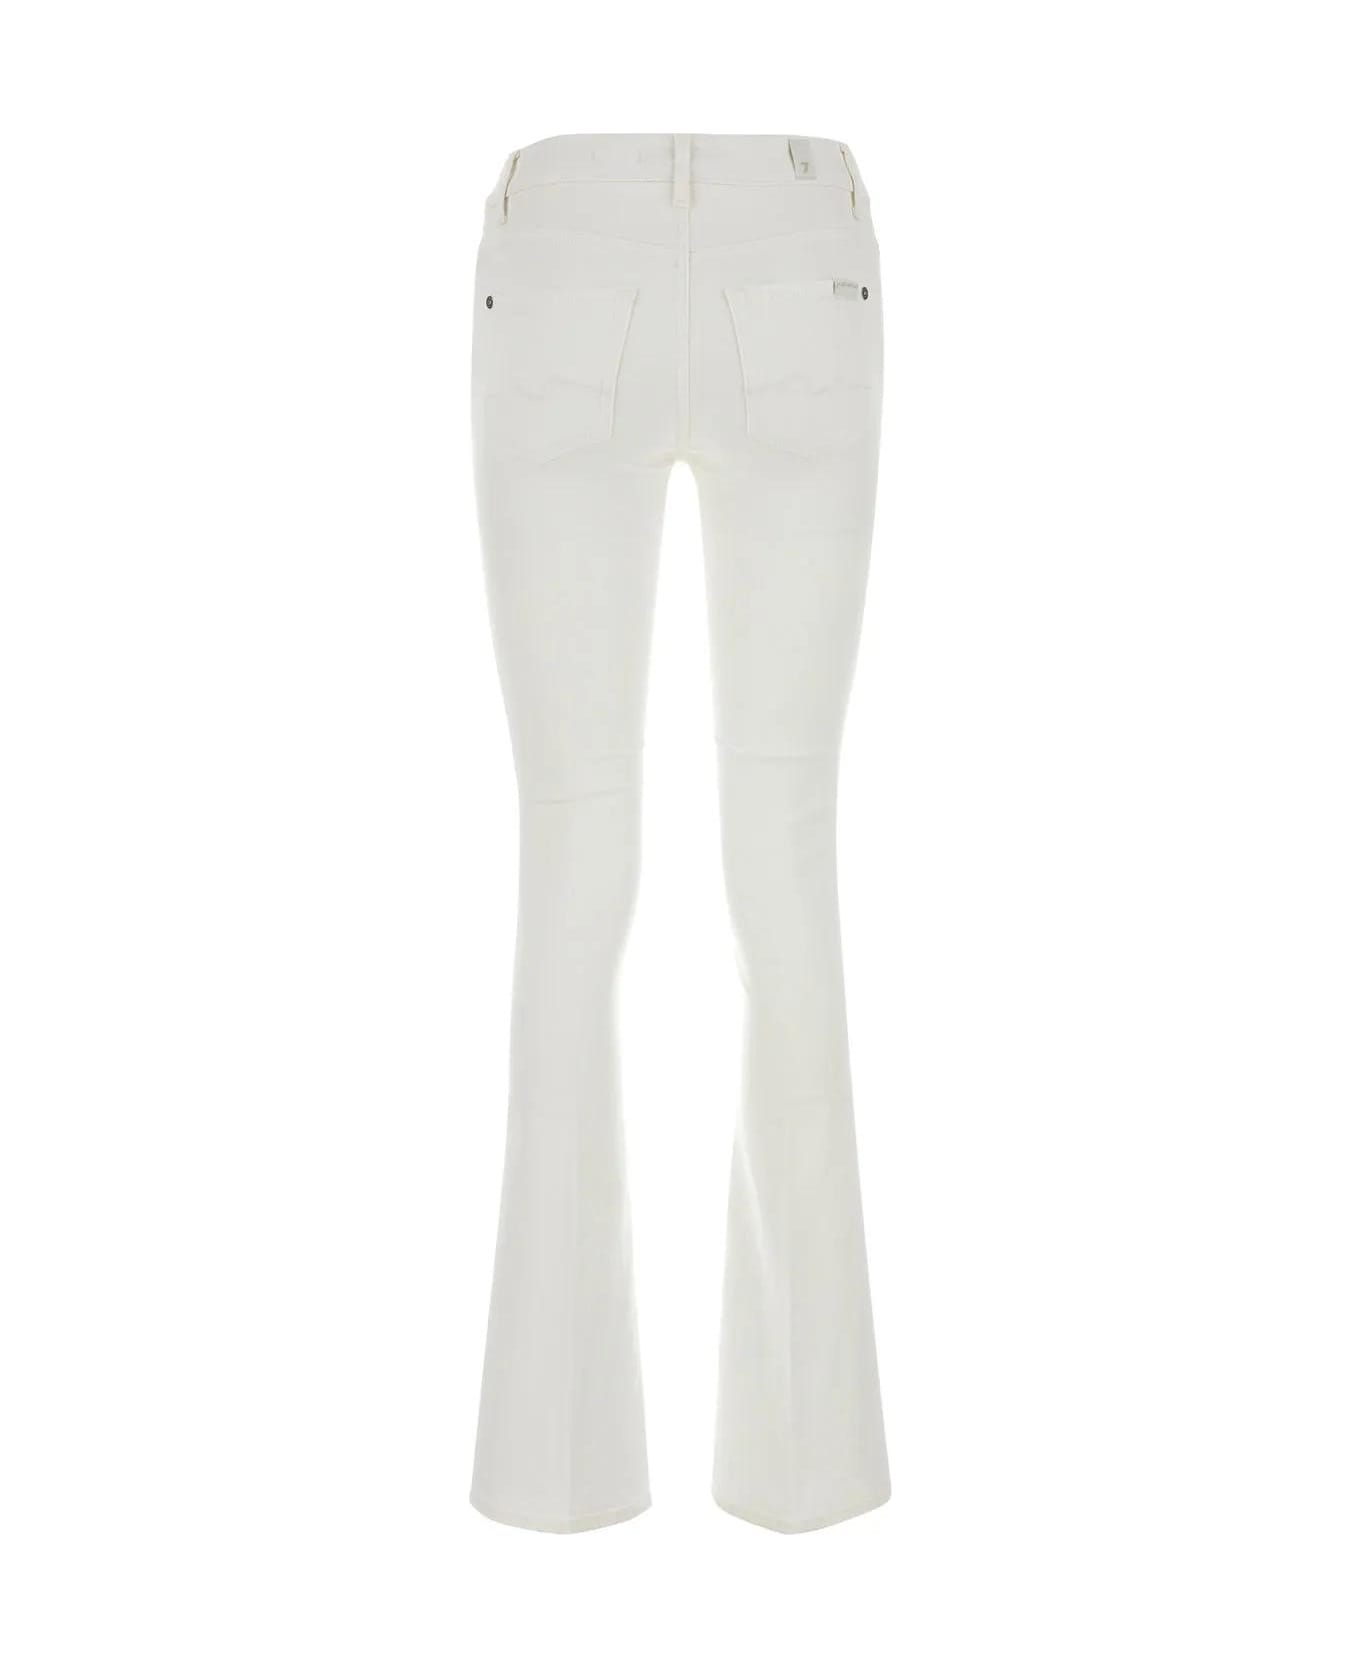 7 For All Mankind White Stretch Denim Bootcut Jeans - White